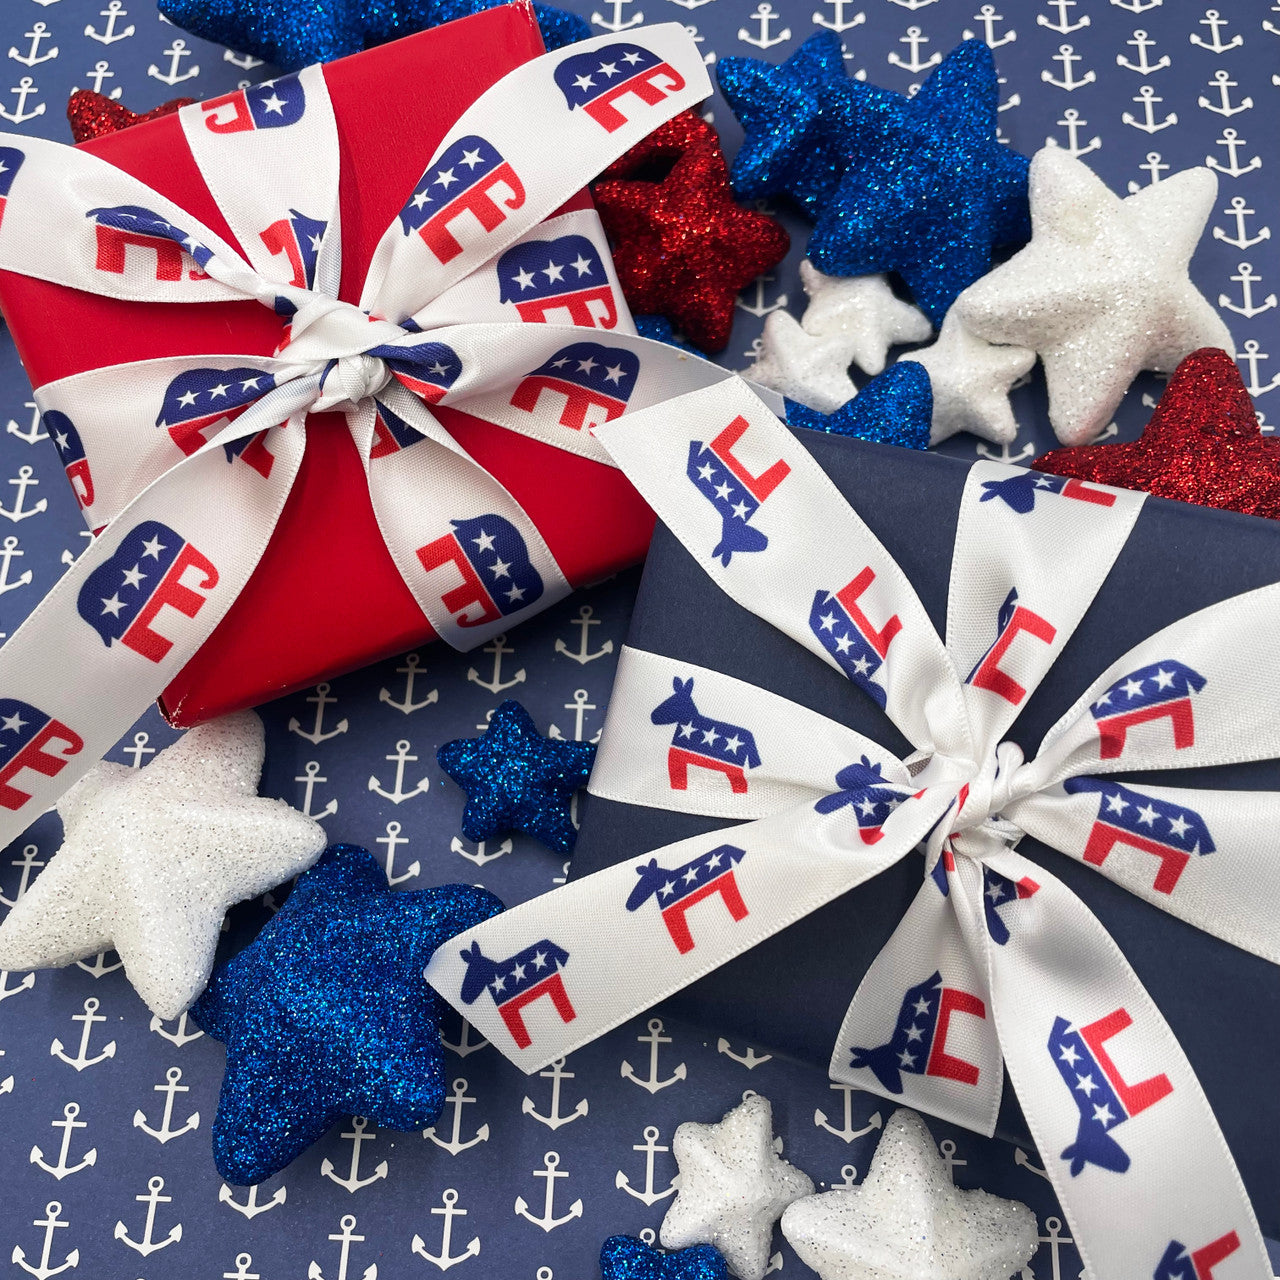 Political Party Ribbon Democrat donkey, Republican elephant for rallies, or conventions, printed on 7/8" white satin